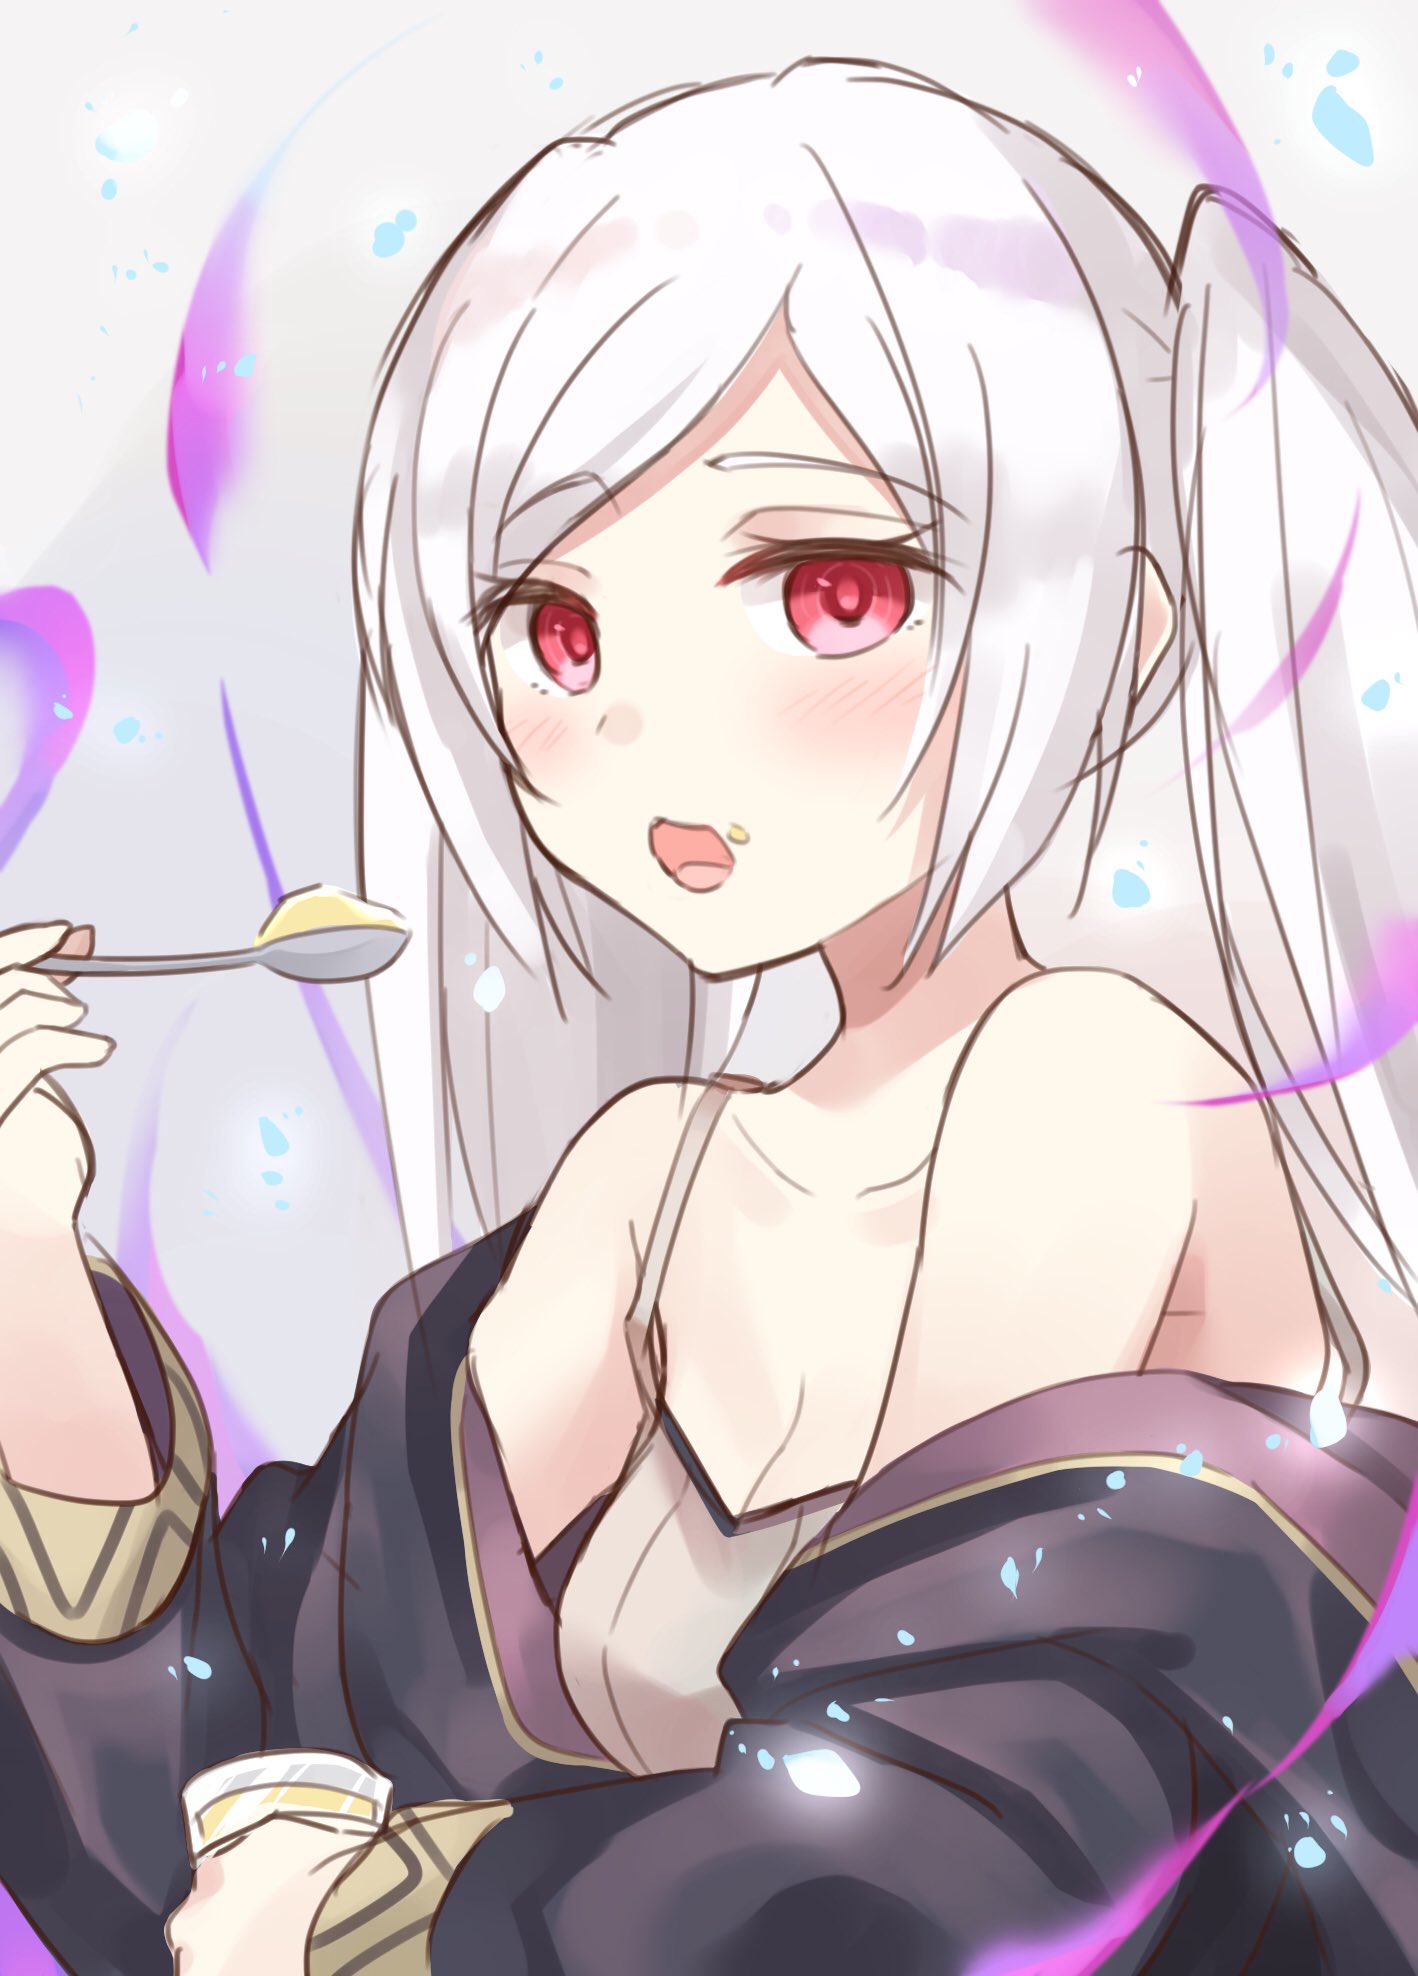 1girl bare_shoulders blush coat cup drinking_glass eating eyebrows_visible_through_hair female_my_unit_(fire_emblem:_kakusei) fire_emblem fire_emblem:_kakusei fire_emblem_heroes food food_on_face highres looking_at_viewer my_unit_(fire_emblem:_kakusei) open_mouth red_eyes shiyo_yoyoyo spoon twintails white_hair